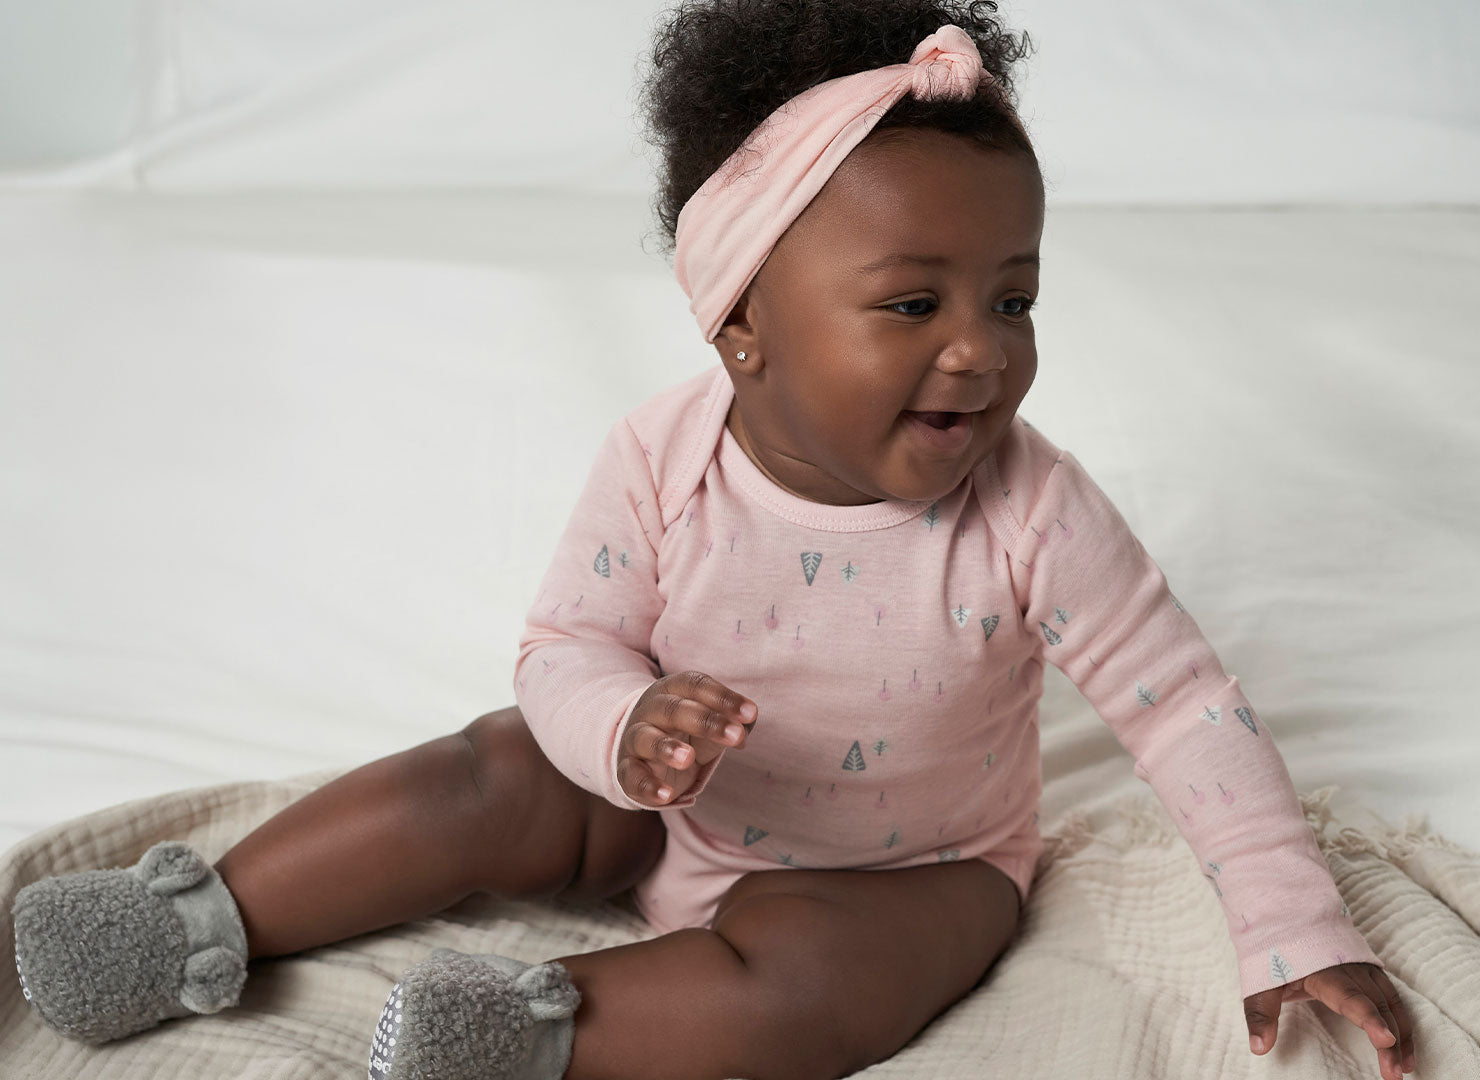 Snuggled up in a pink bodysuit, a sweet baby girl enjoys the cozy comfort of a bed during the winter season.